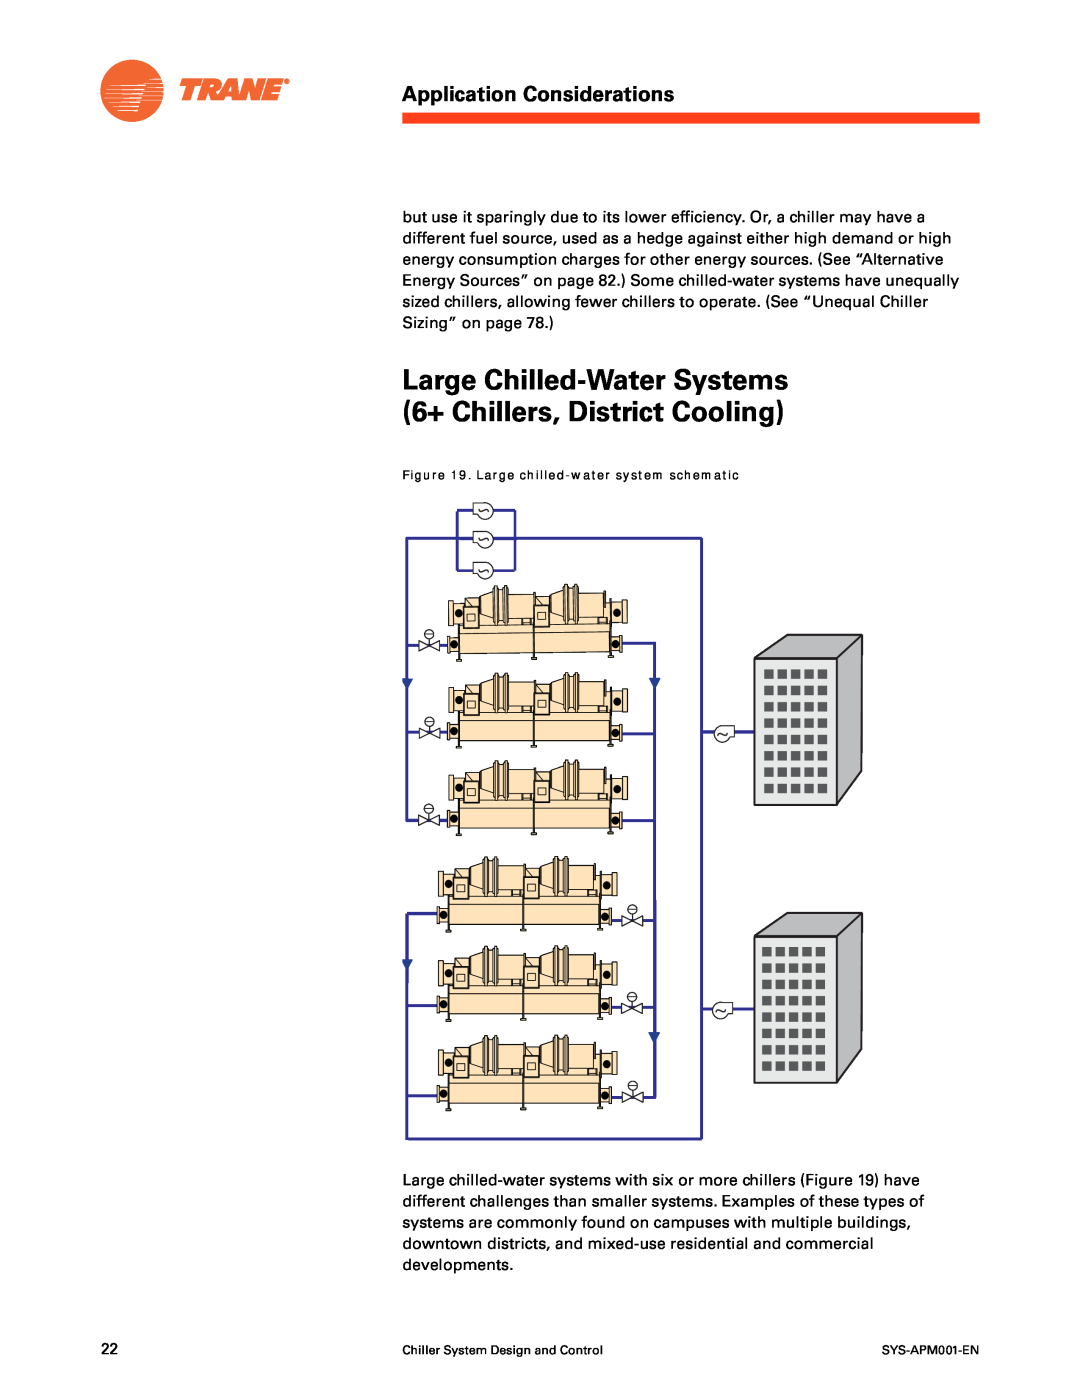 Trane SYS-APM001-EN manual Large Chilled-Water Systems 6+ Chillers, District Cooling, Application Considerations 